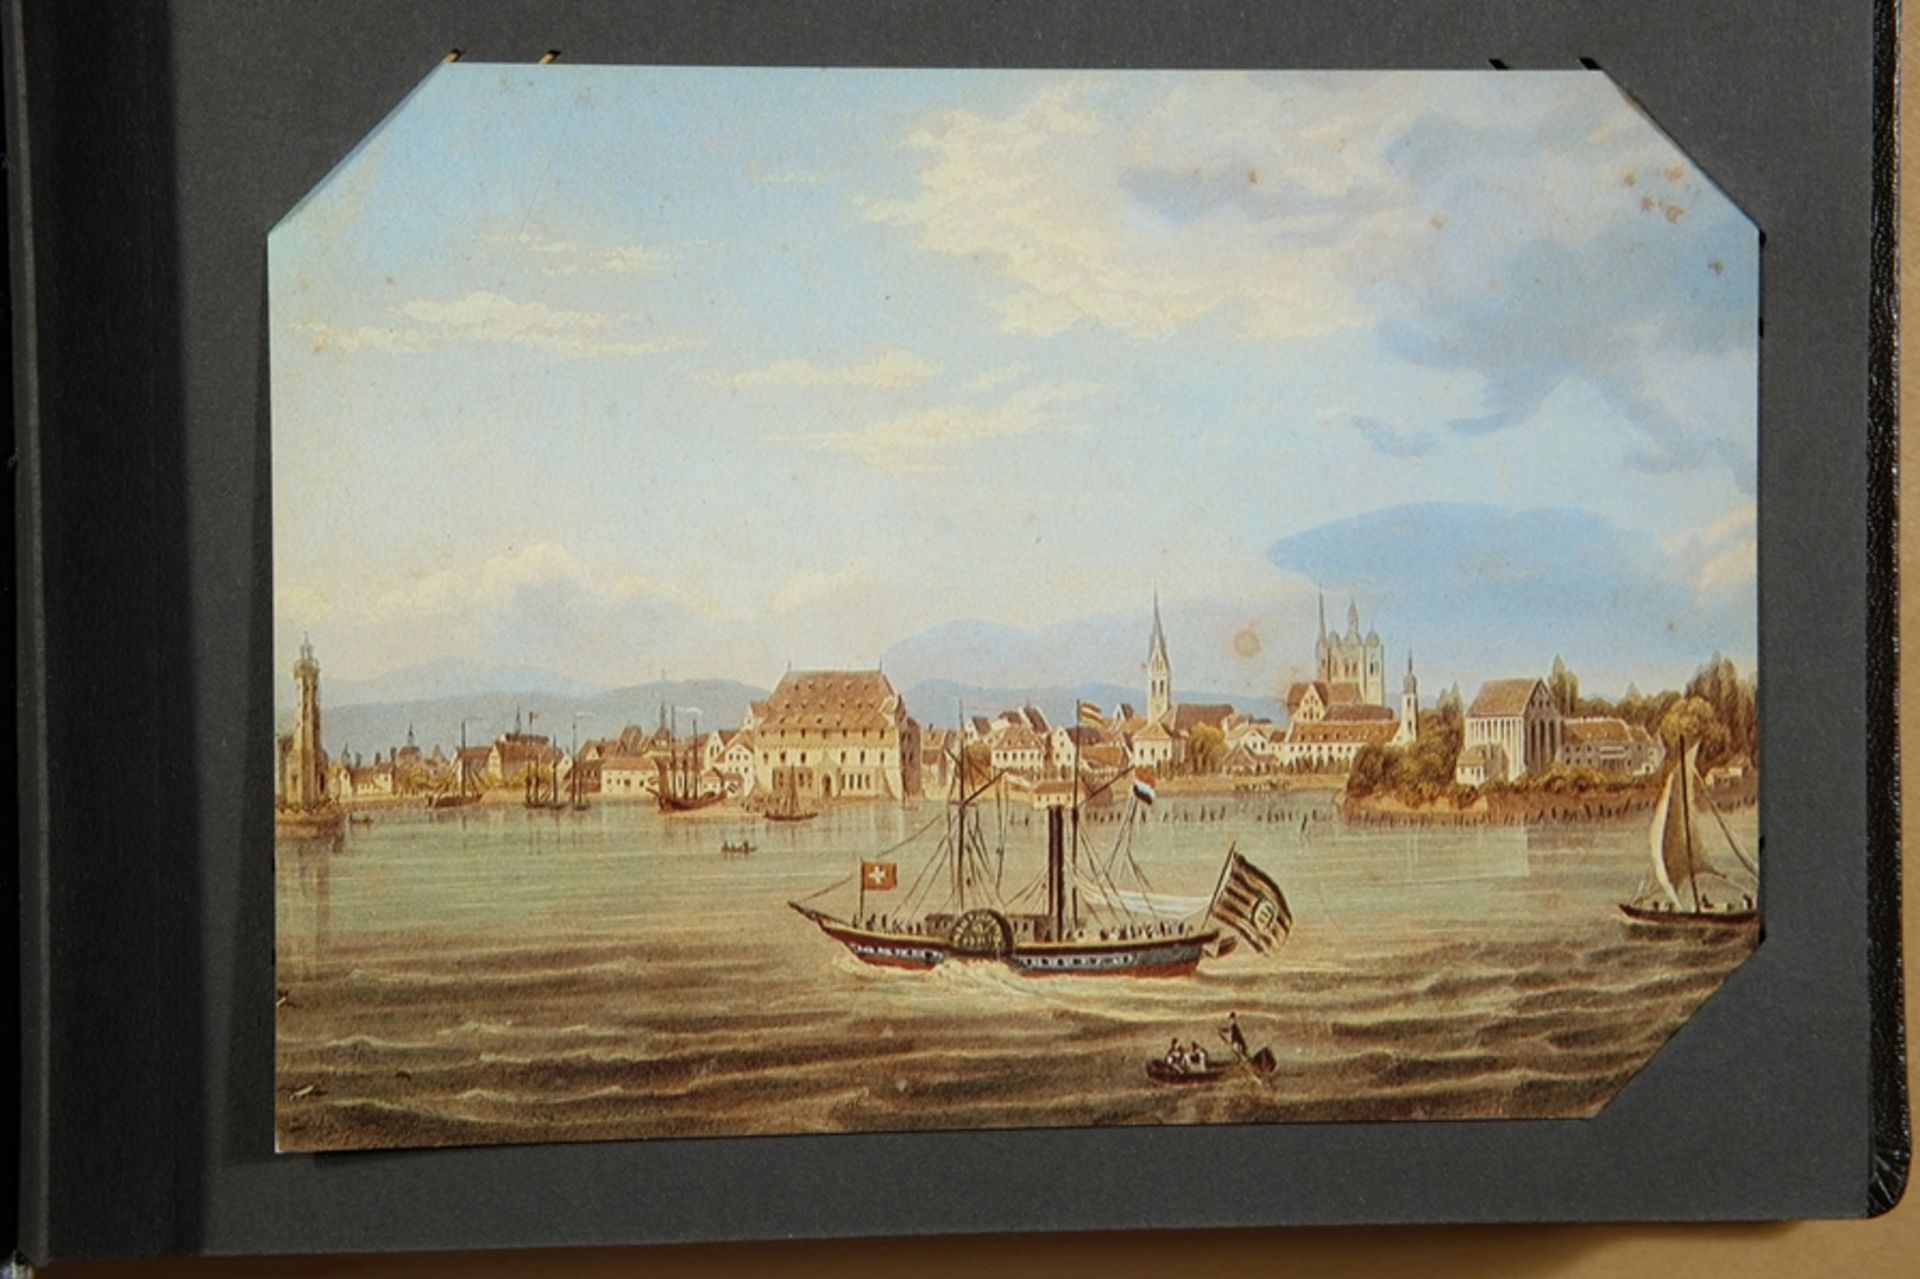 92 postcards, collection focus 'Greater Lake Constance and South Rhine', turn of the century. - Image 2 of 5